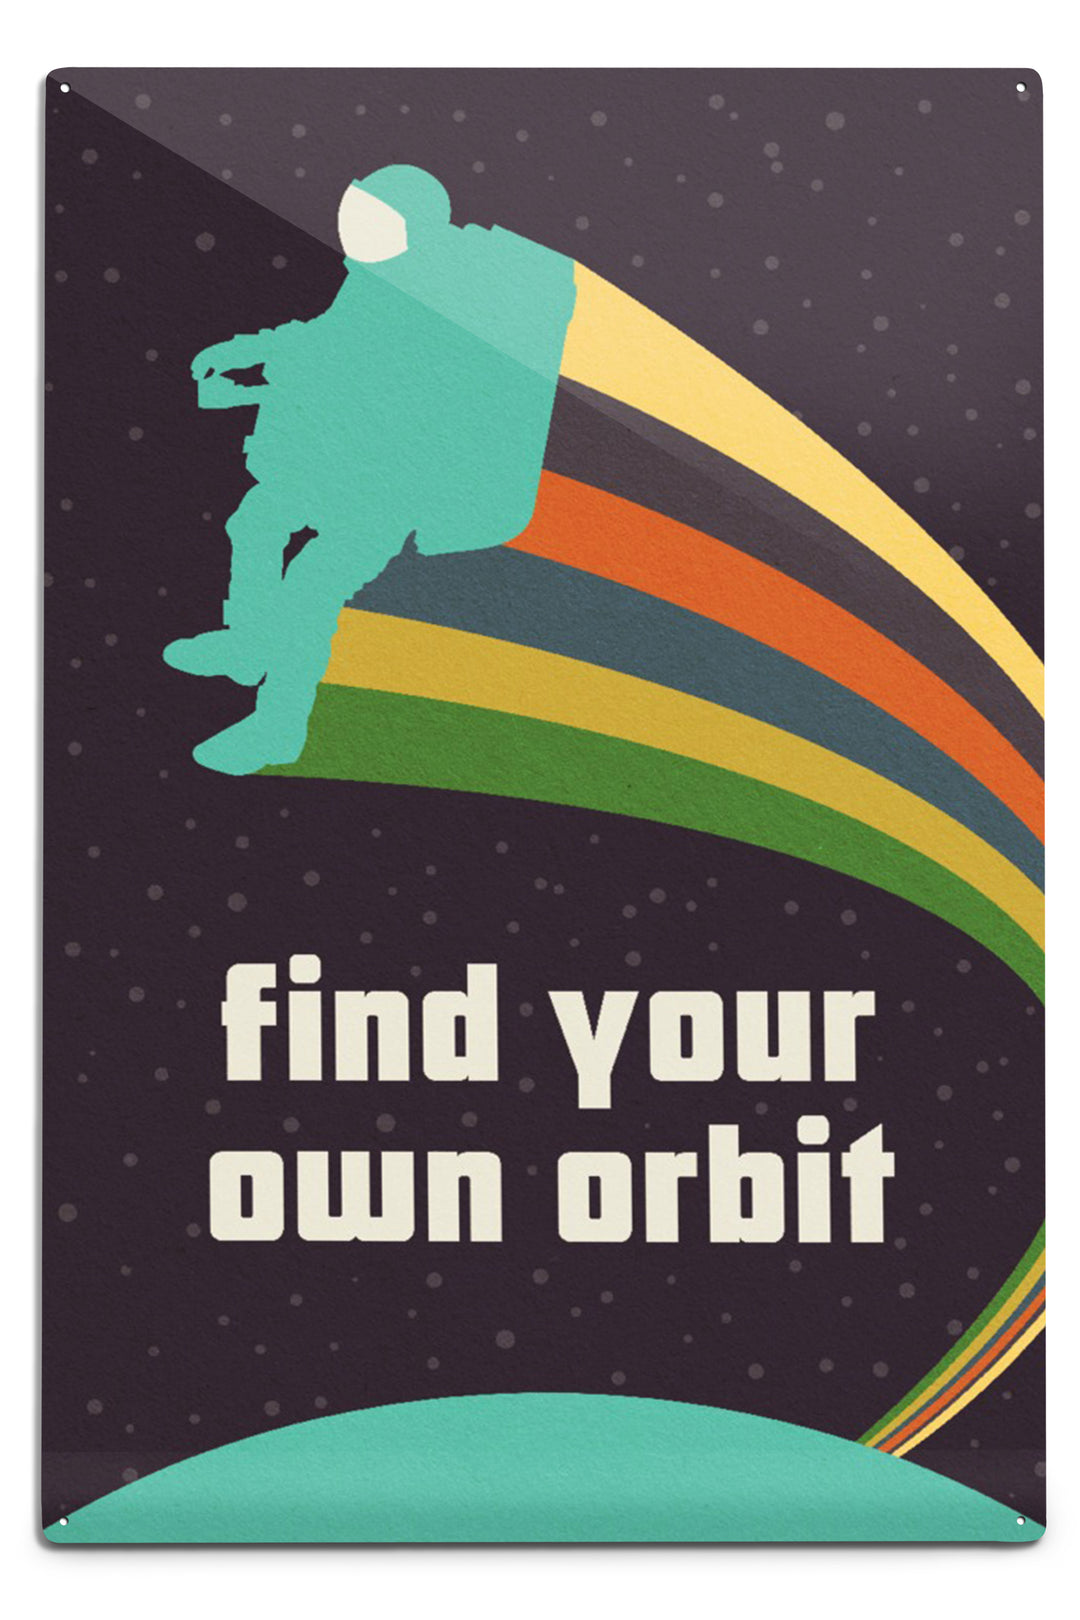 Space Is The Place Collection, Rainbow Astronaut With Jetpack, Find Your Own Orbit, Metal Signs